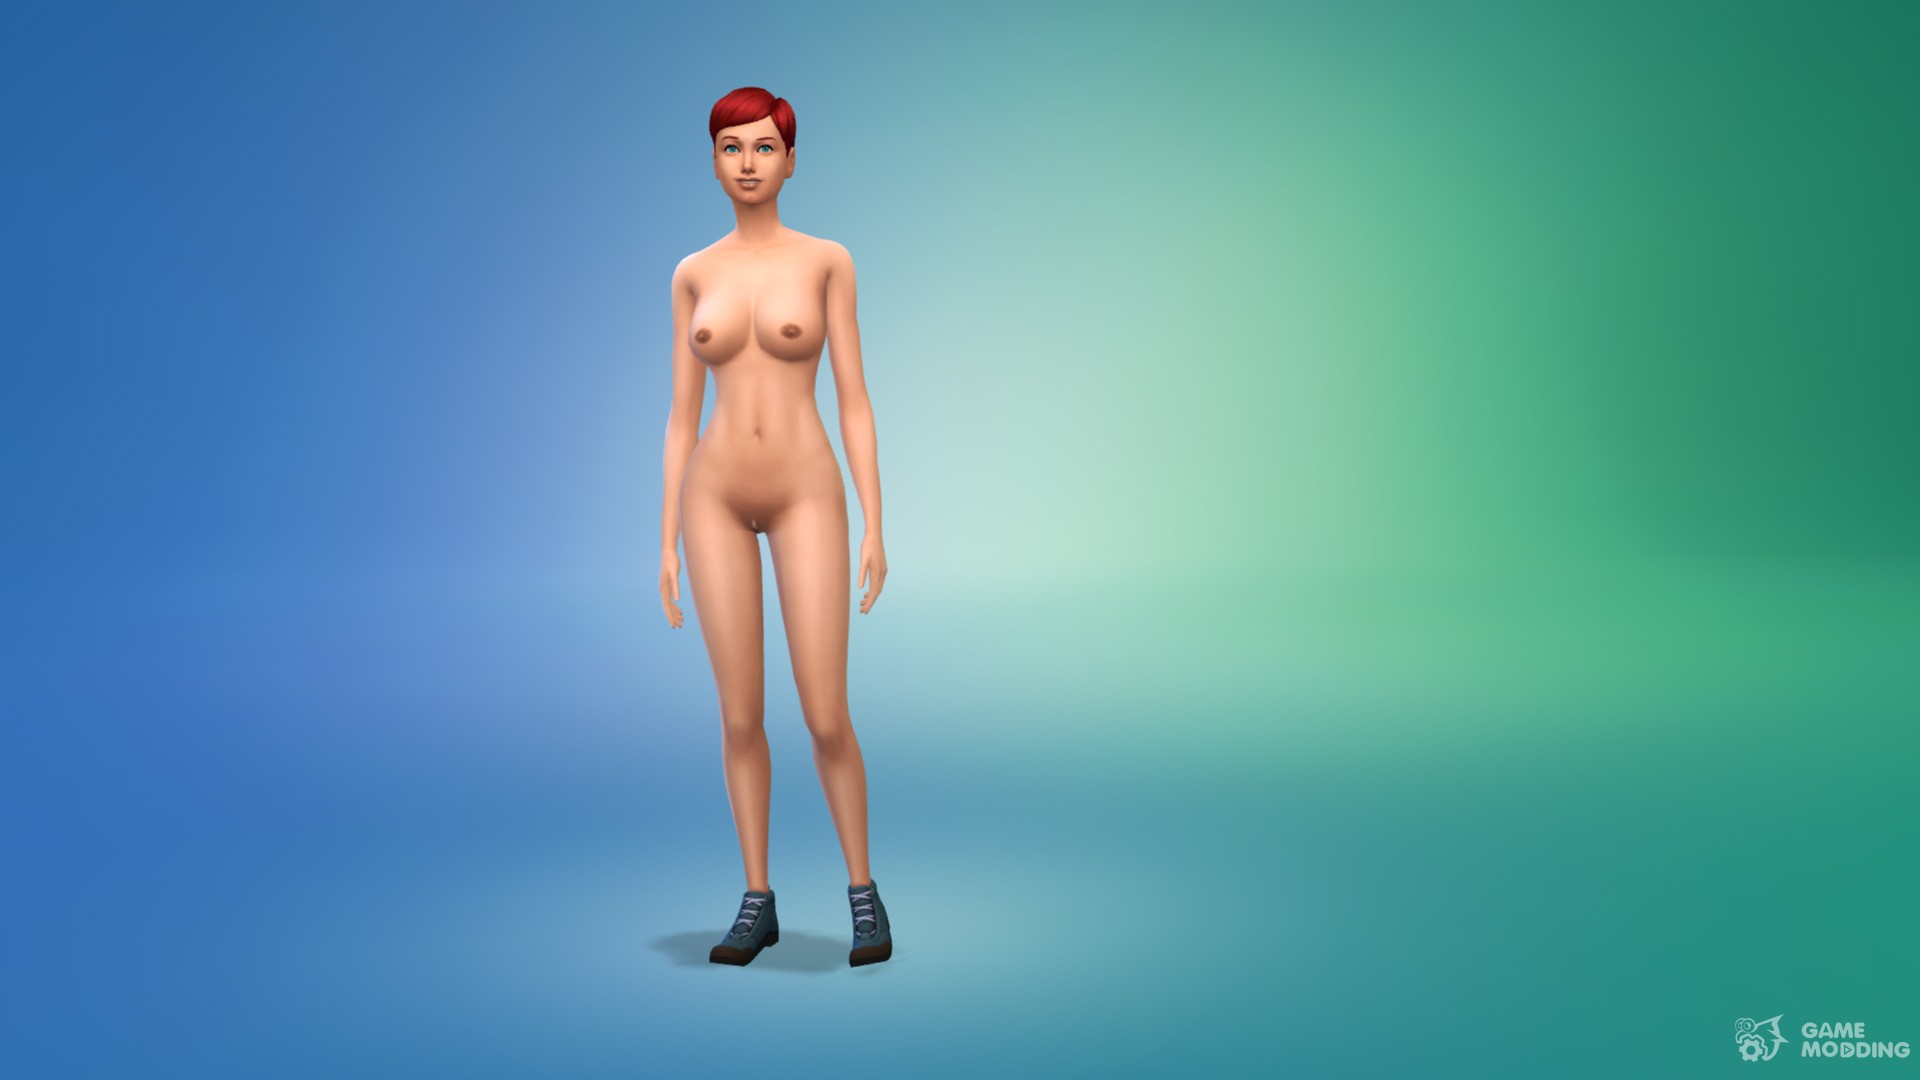 the sims 4 nude mod download